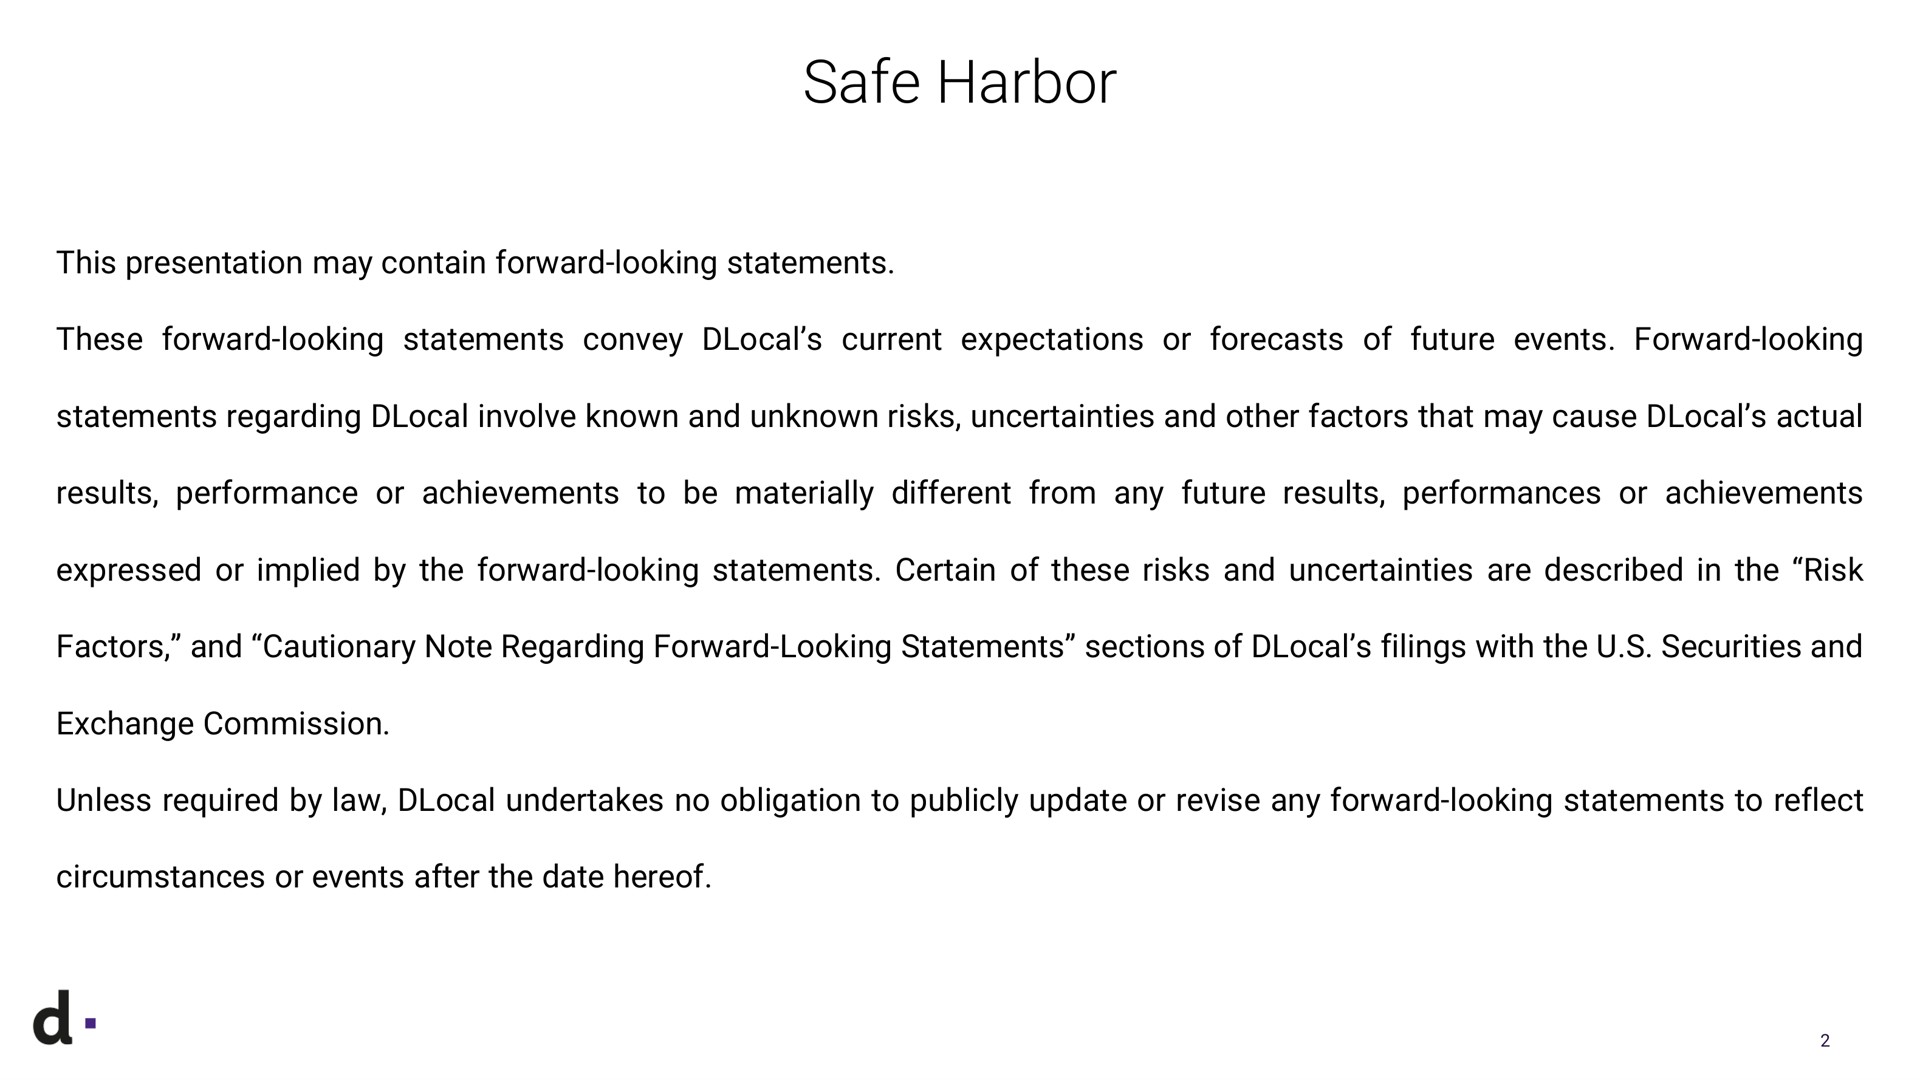 safe harbor this presentation may contain forward looking statements these forward looking statements convey current expectations or forecasts of future events forward looking statements regarding involve known and unknown risks uncertainties and other factors that may cause actual results performance or achievements to be materially different from any future results performances or achievements expressed or implied by the forward looking statements certain of these risks and uncertainties are described in the risk factors and cautionary note regarding forward looking statements sections of filings with the securities and exchange commission unless required by law undertakes no obligation to publicly update or revise any forward looking statements to reflect circumstances or events after the date hereof | dLocal